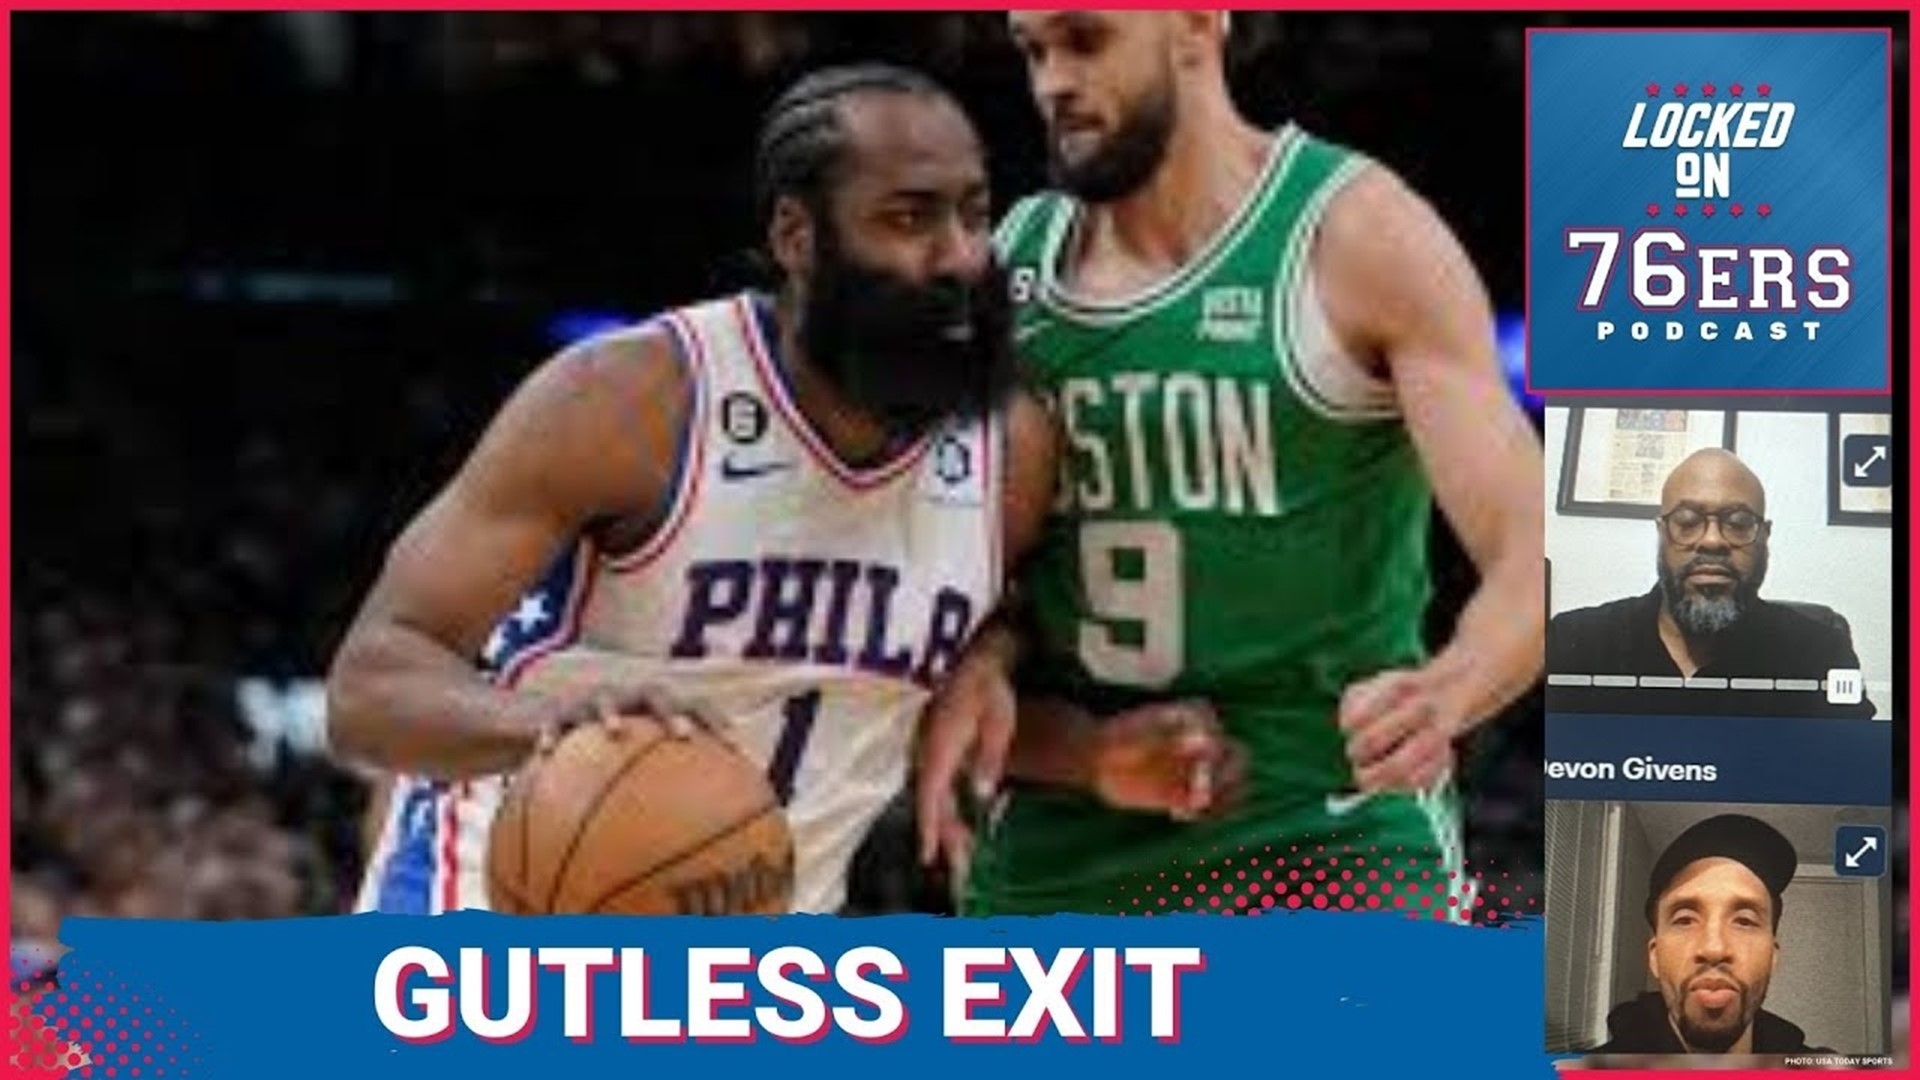 The Boston Celtics defeated the 76ers  in Game 7 of the Eastern Conference semifinals at TD Garden. This marked the Sixers' third consecutive second-round exit.